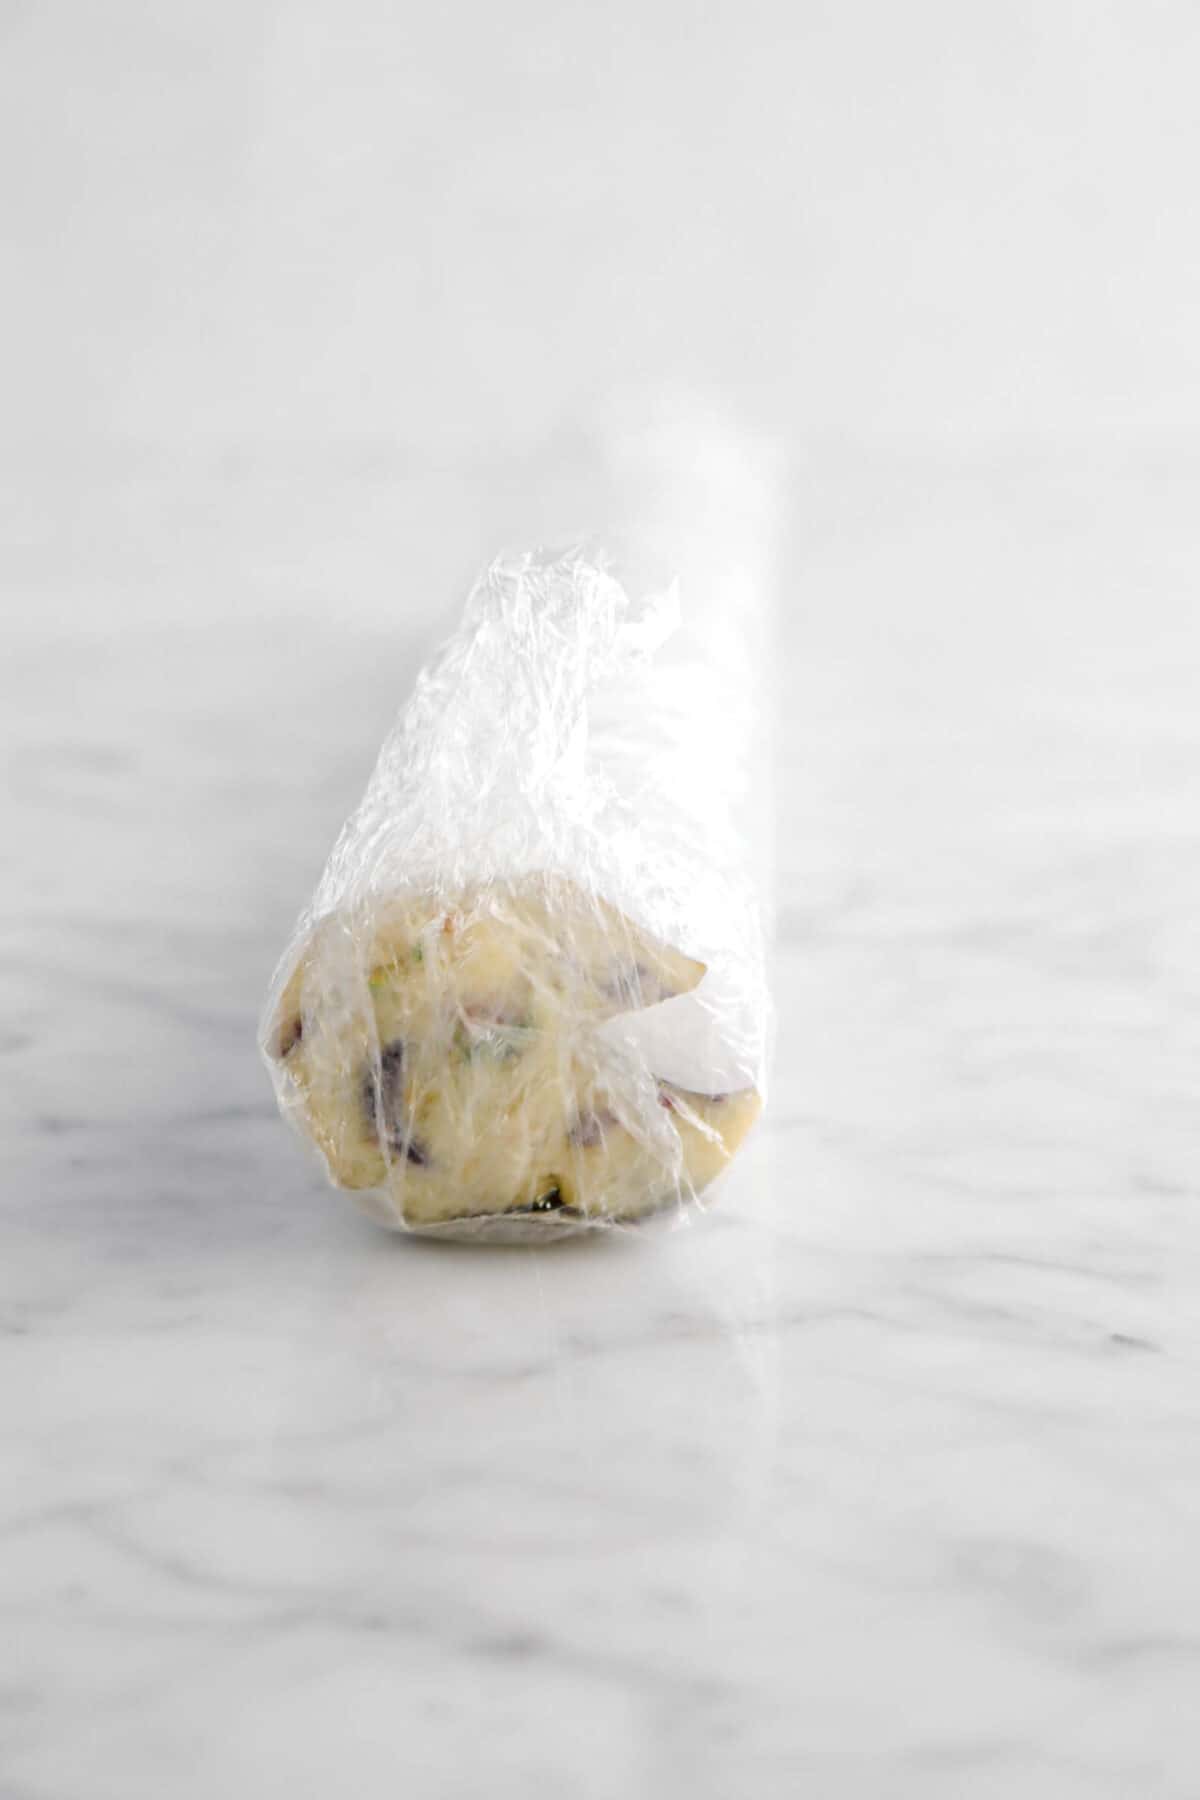 wrapped cookie dough with plastic wrap also around the log